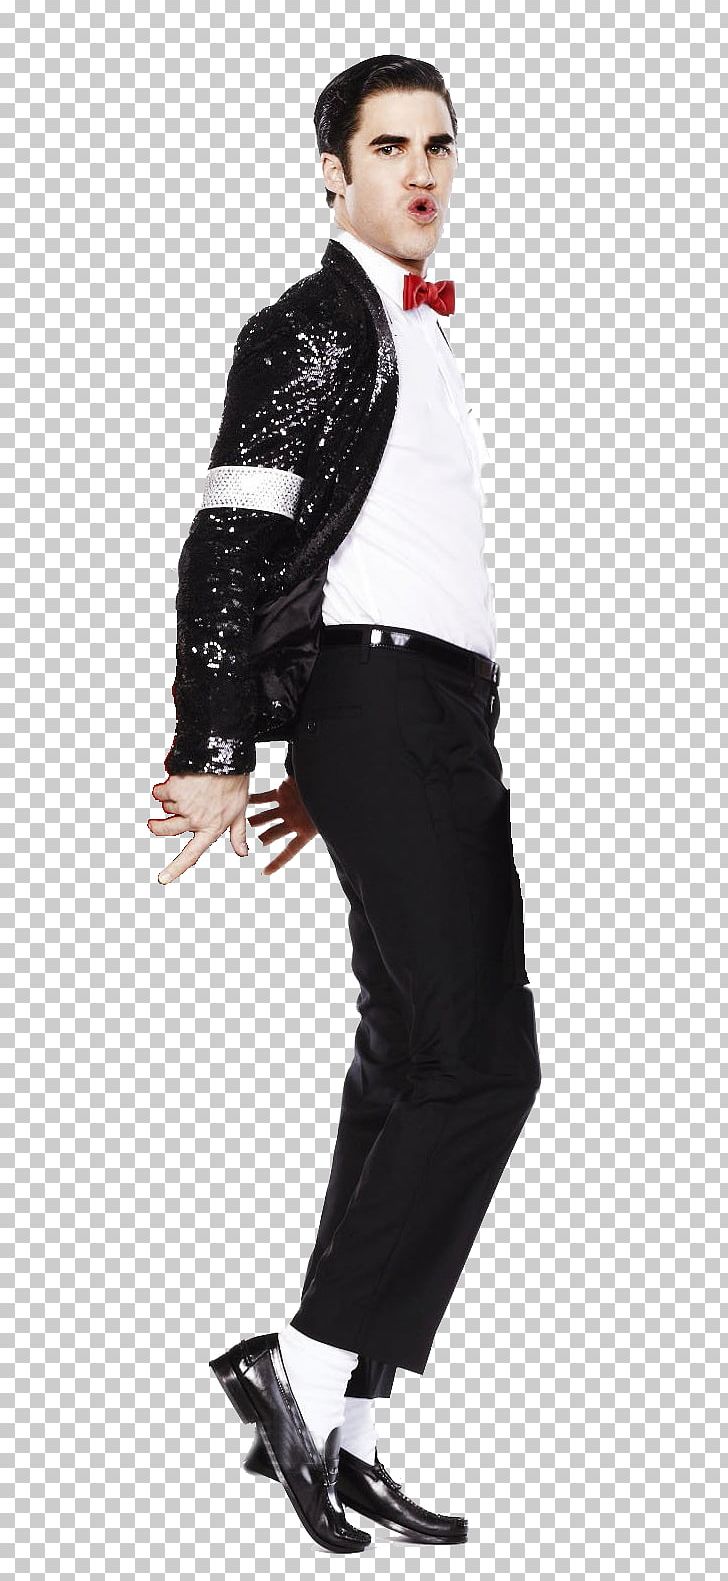 Michael Jackson: The Experience Blaine Anderson Quinn Fabray Glee PNG, Clipart, Blaine Anderson, Celebrities, Cory Monteith, Costume, Episode Free PNG Download